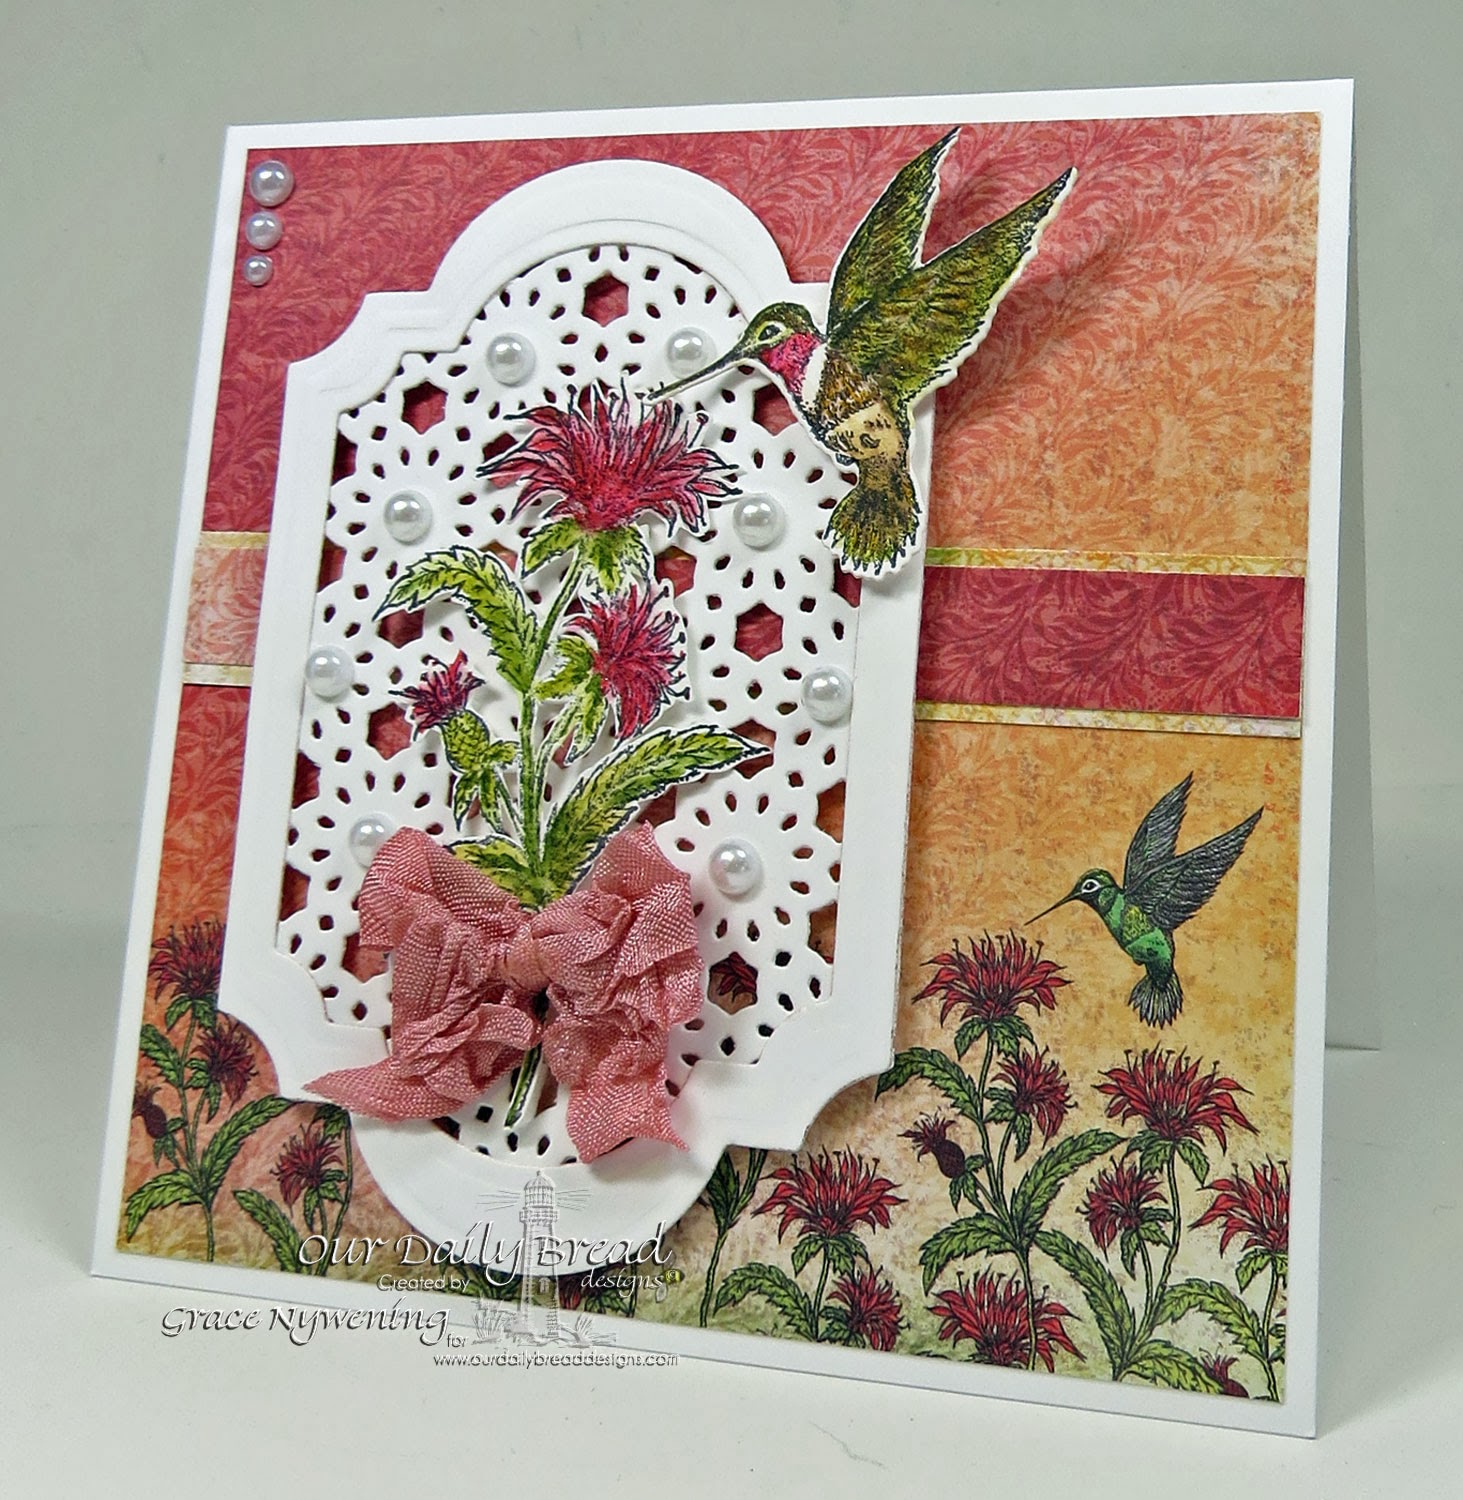 ODBD Stamps: Hummingbird, BeeBalm, designed by Grace Nywening